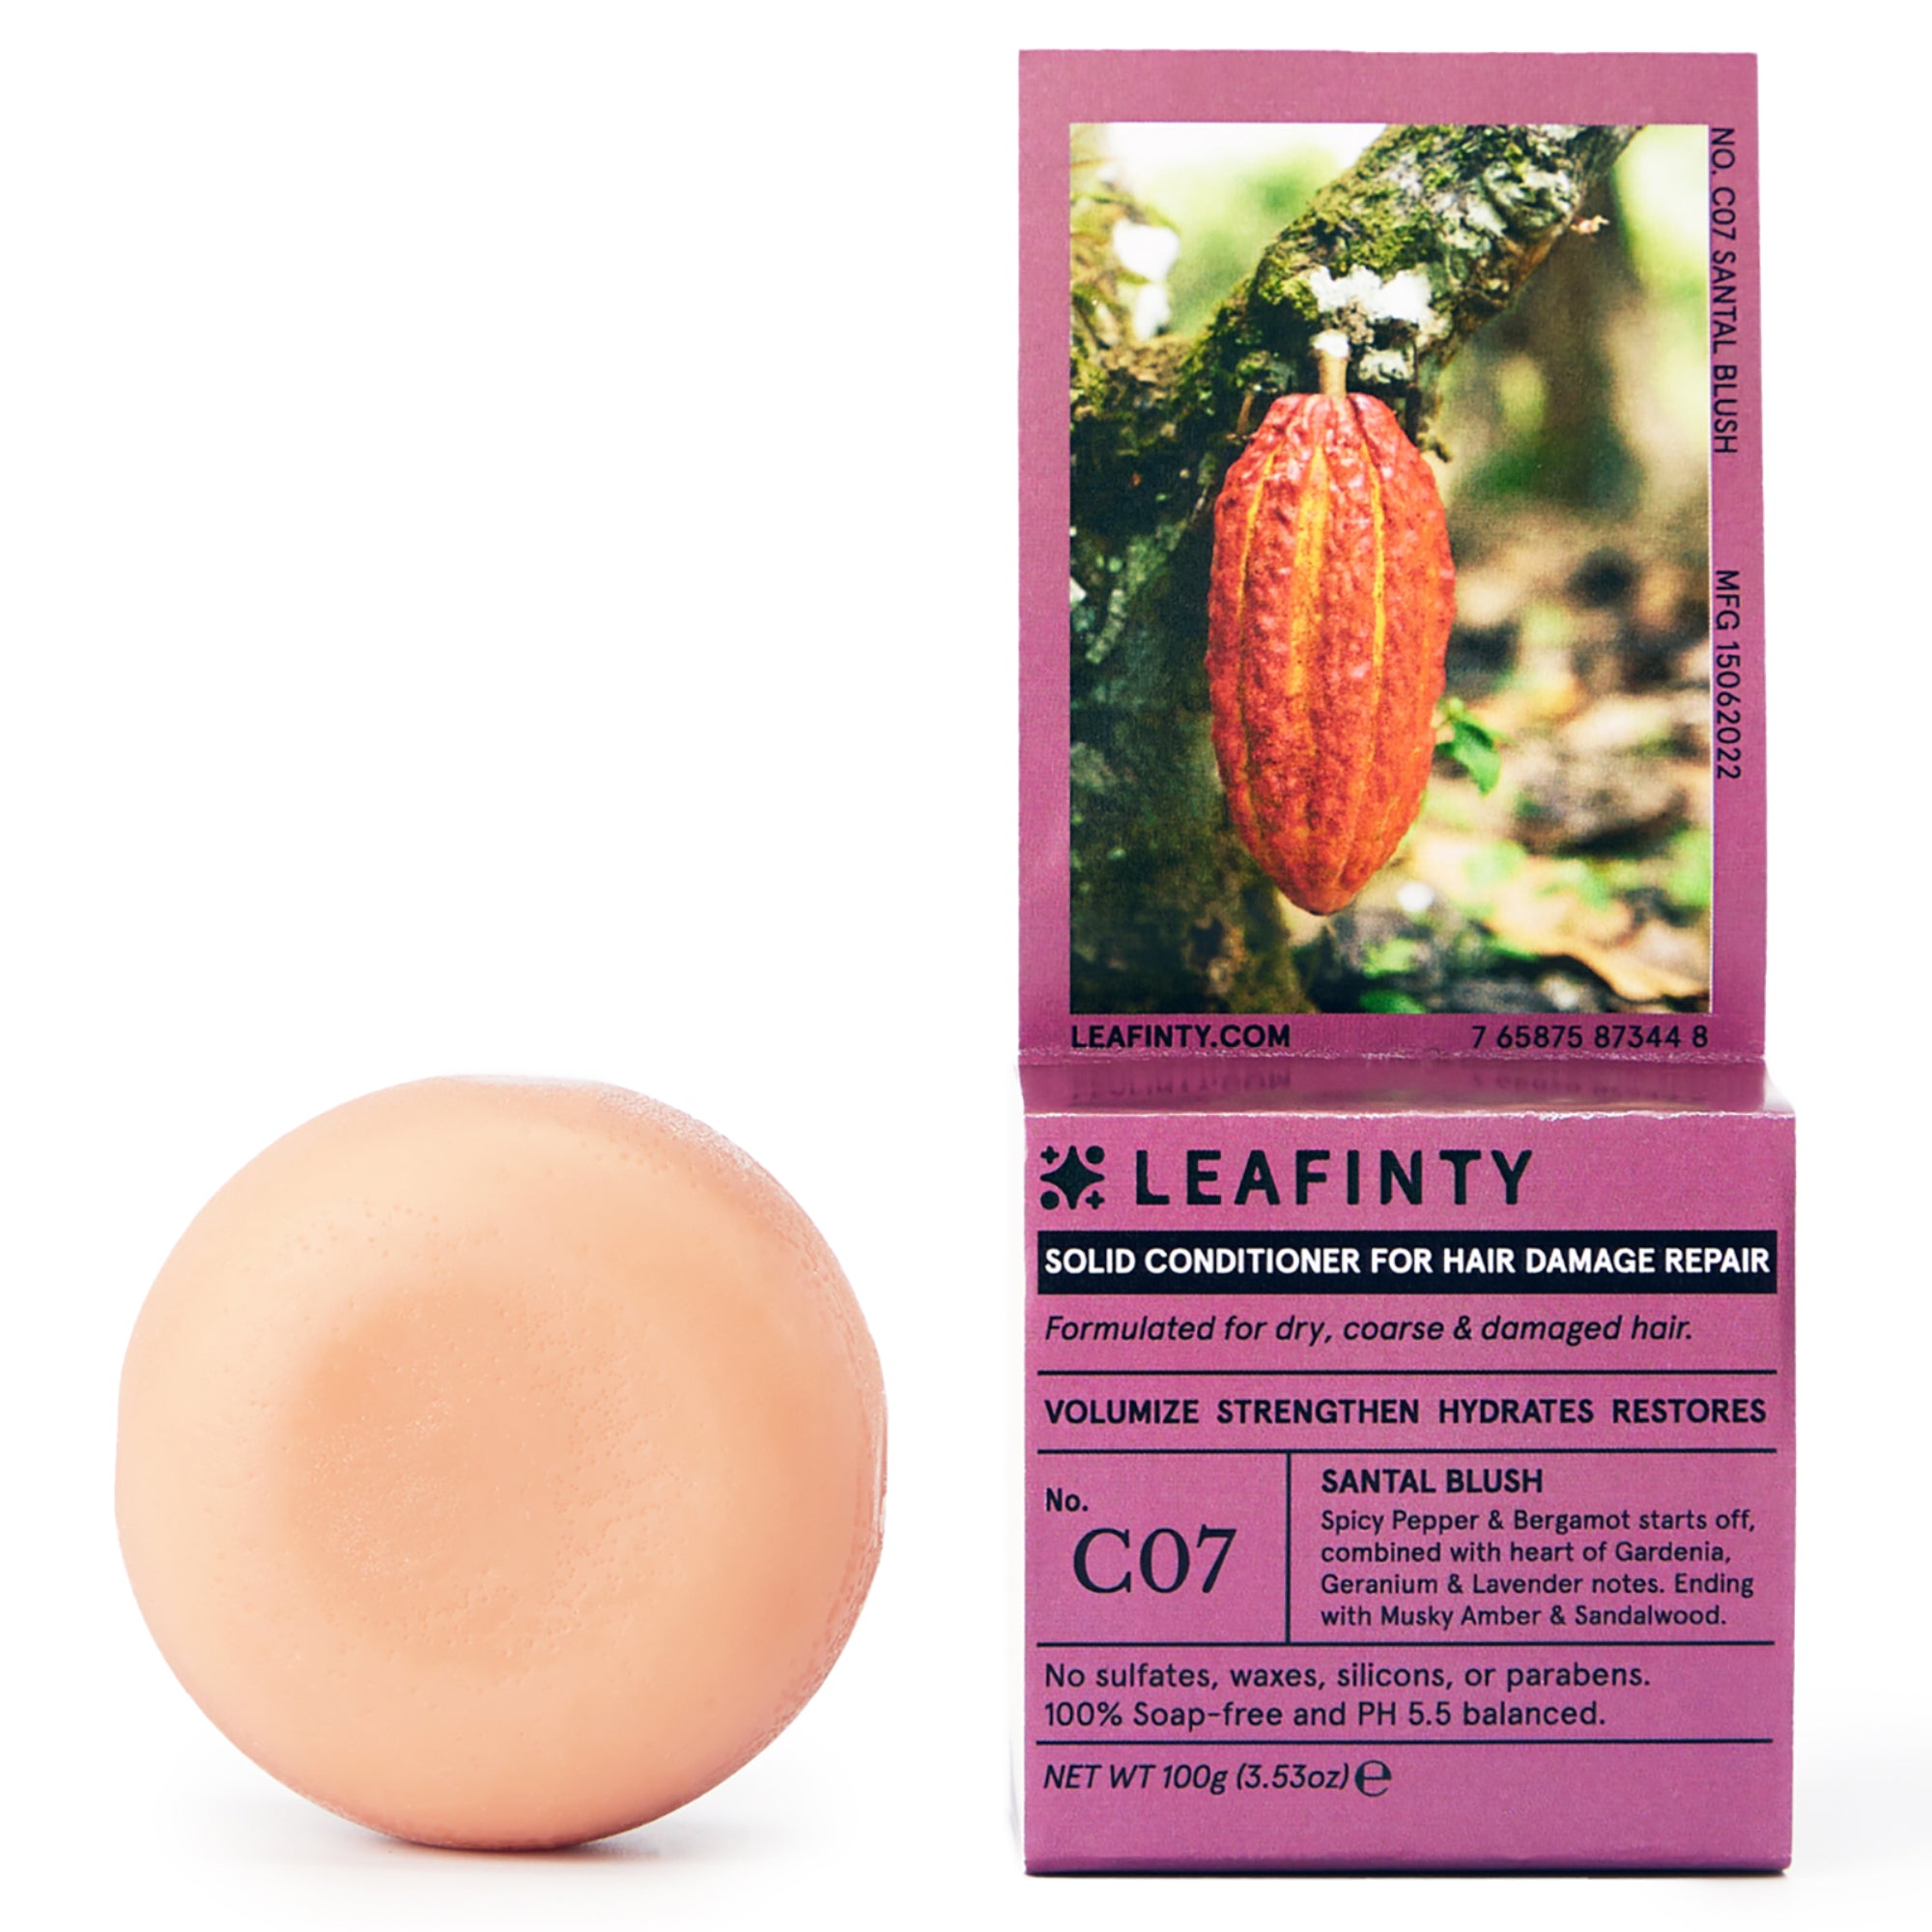 C07 Solid Conditioner Bar for Dry, Coarse & Damaged Hair